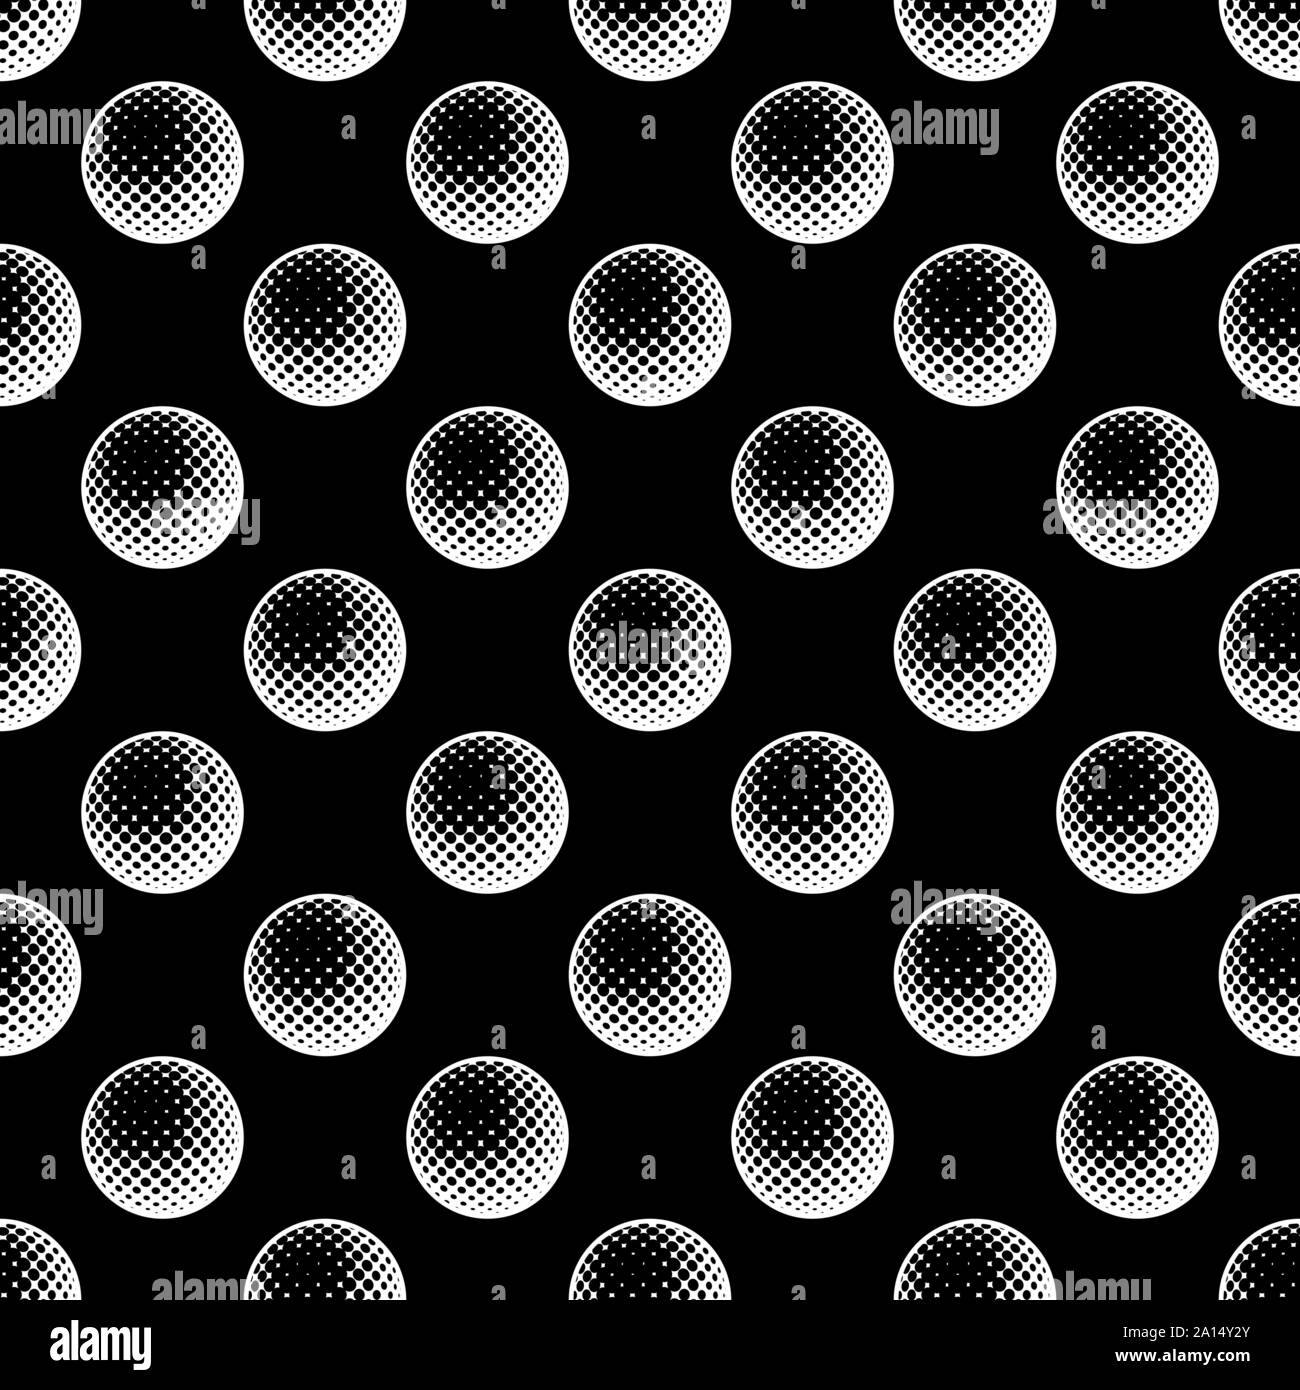 Black background with white outline seamess golf balls pattern Stock Vector